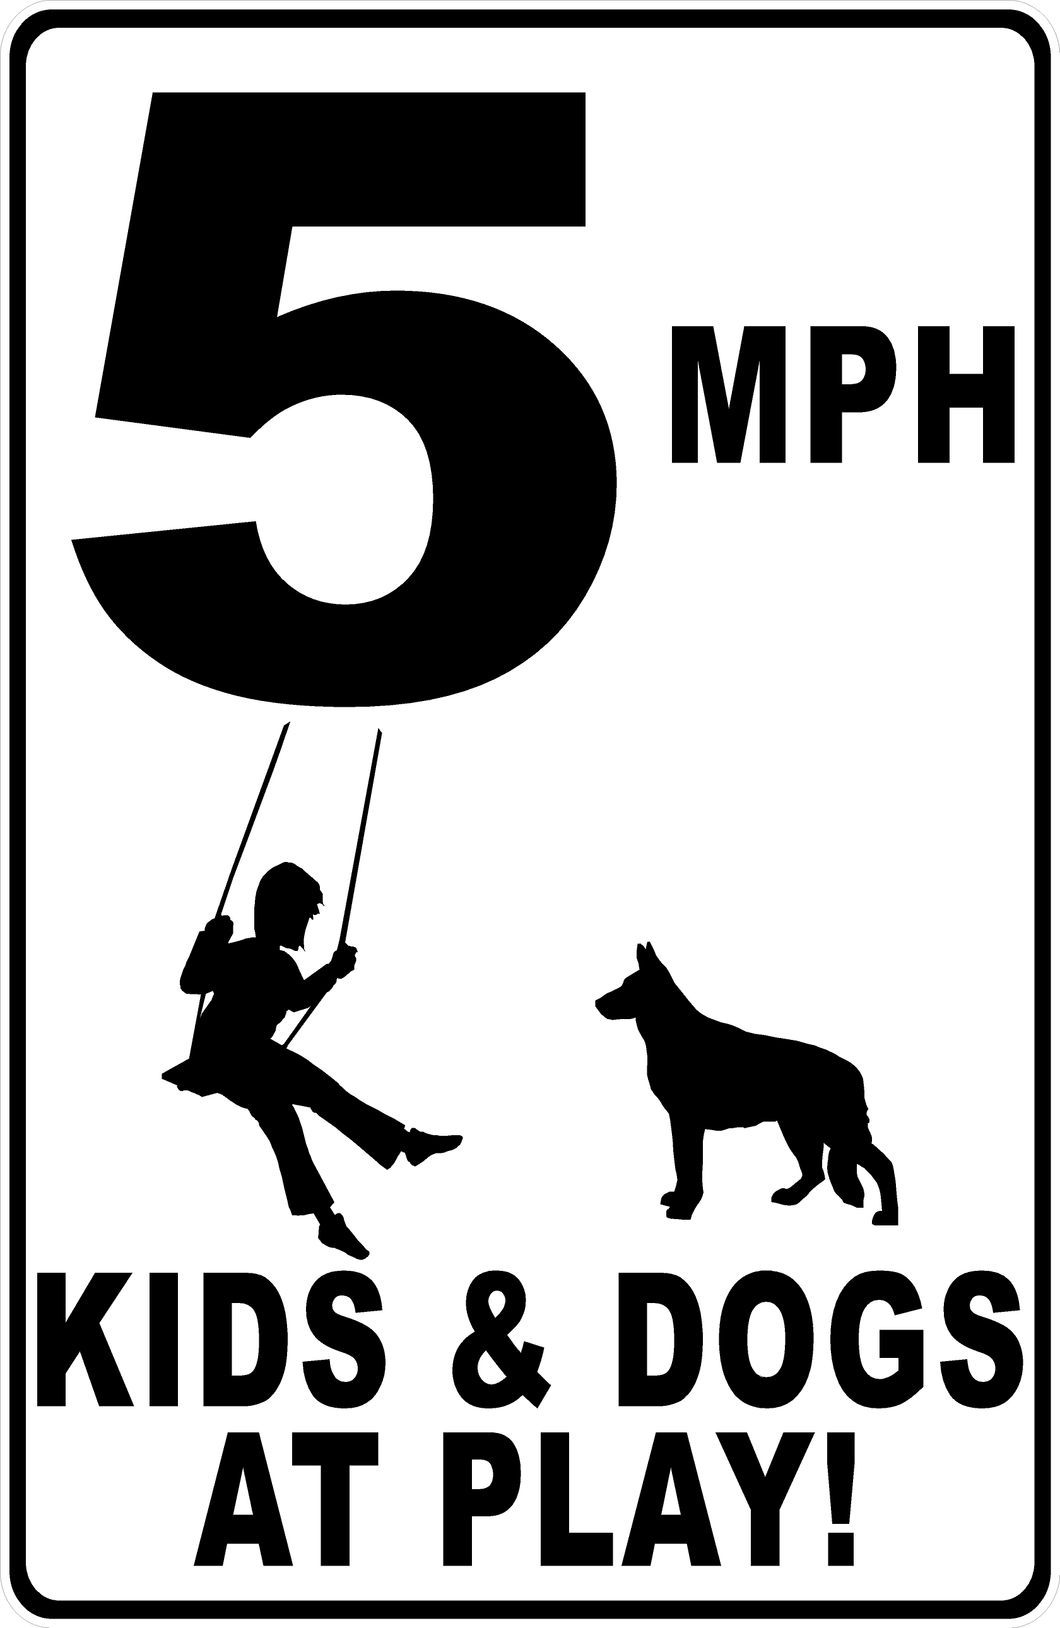 5 (Choice) MPH Kids & Dogs at Play with Posted Speed Limit Sign